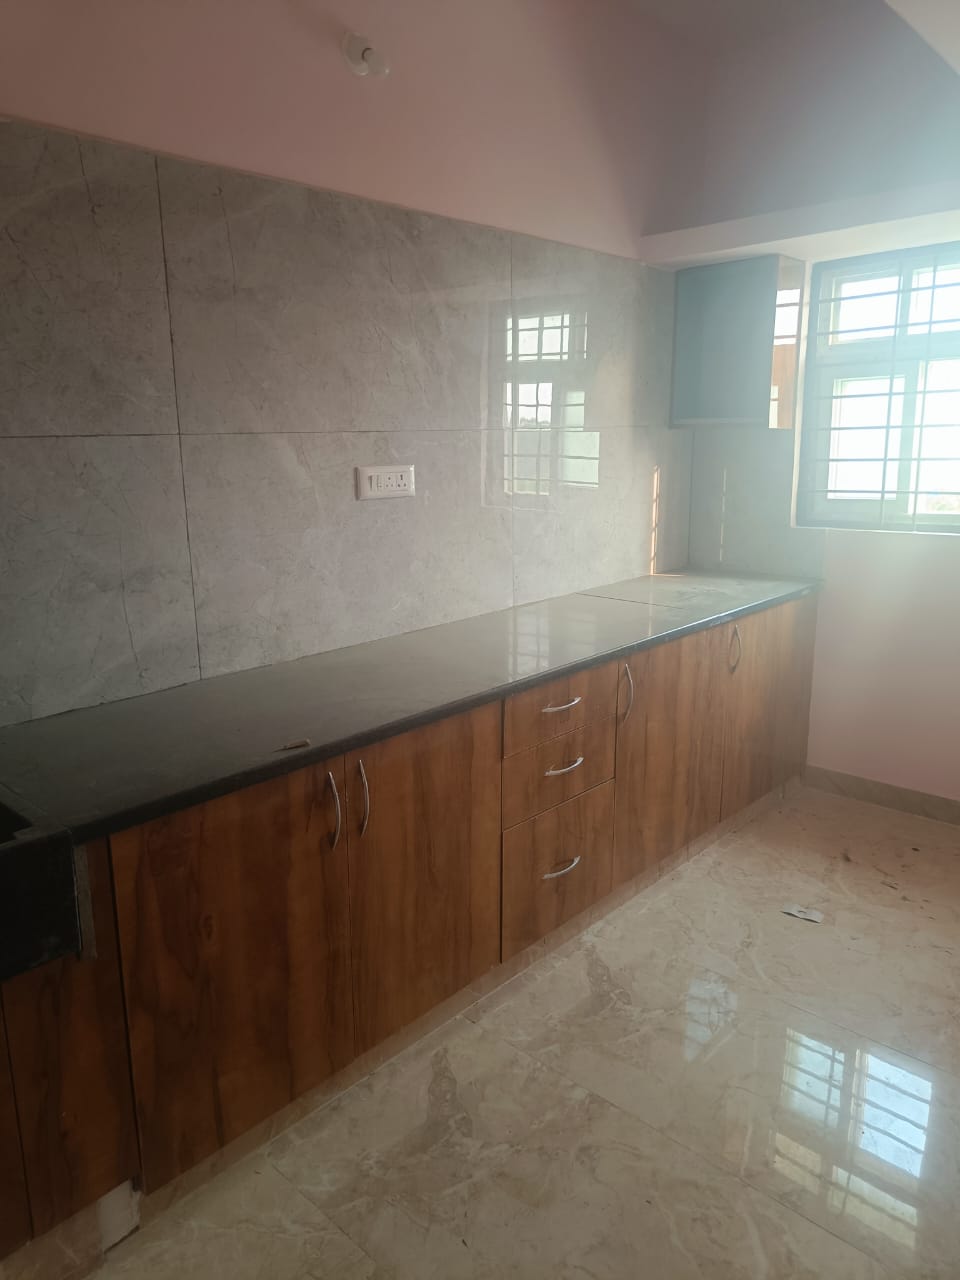 3 BHK Independent House for Lease Only at JAML2 - 4925-27lakh in Padarayanapura